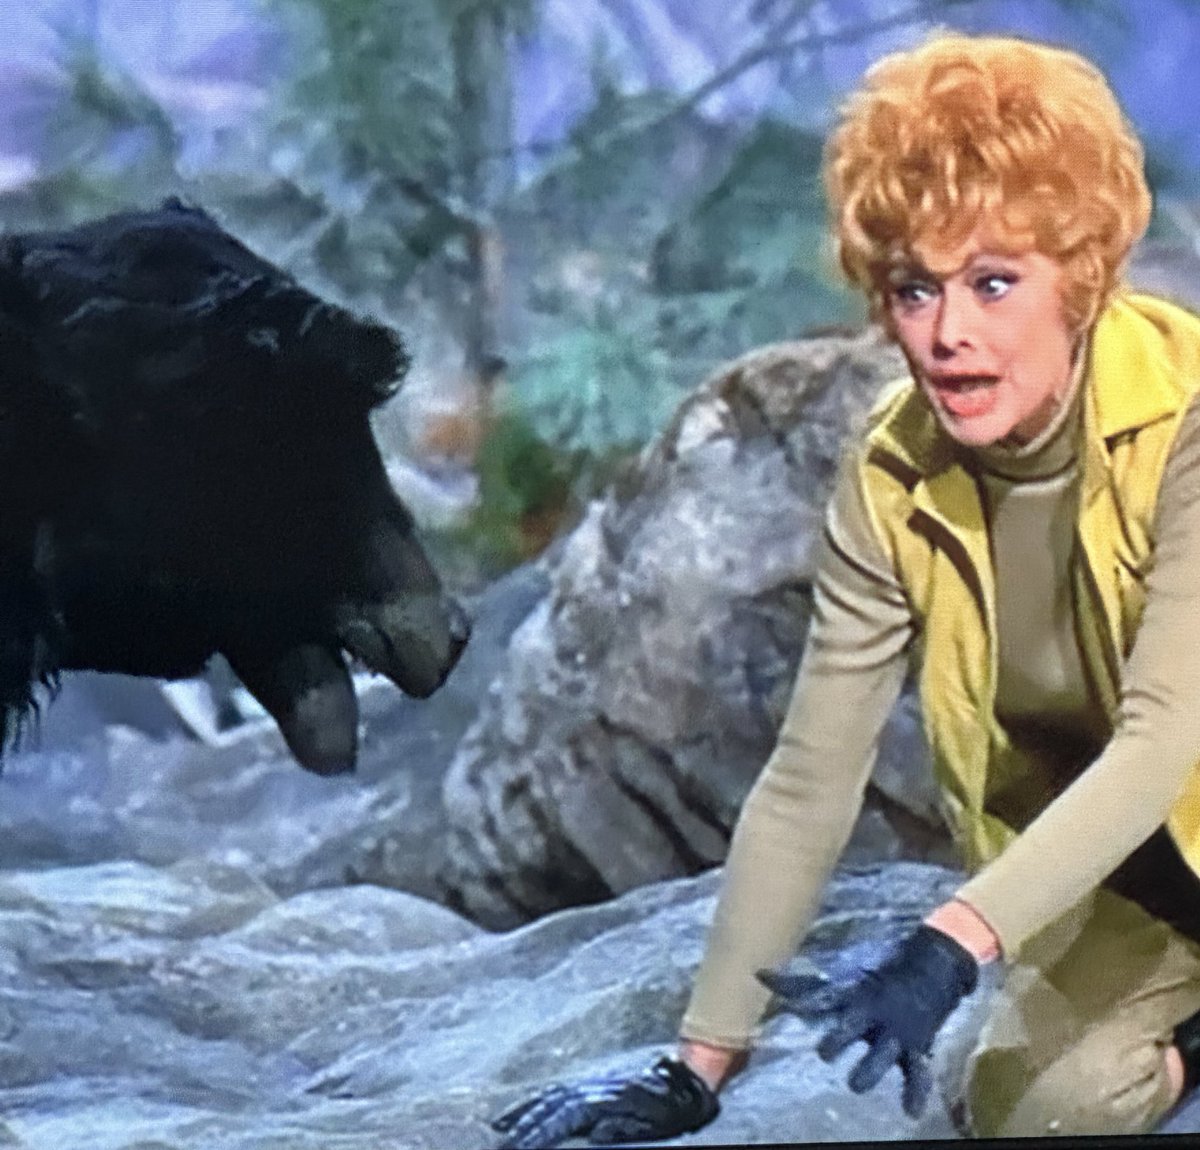 Lucy chose the bear, too.
#lucilleball #hereslucy